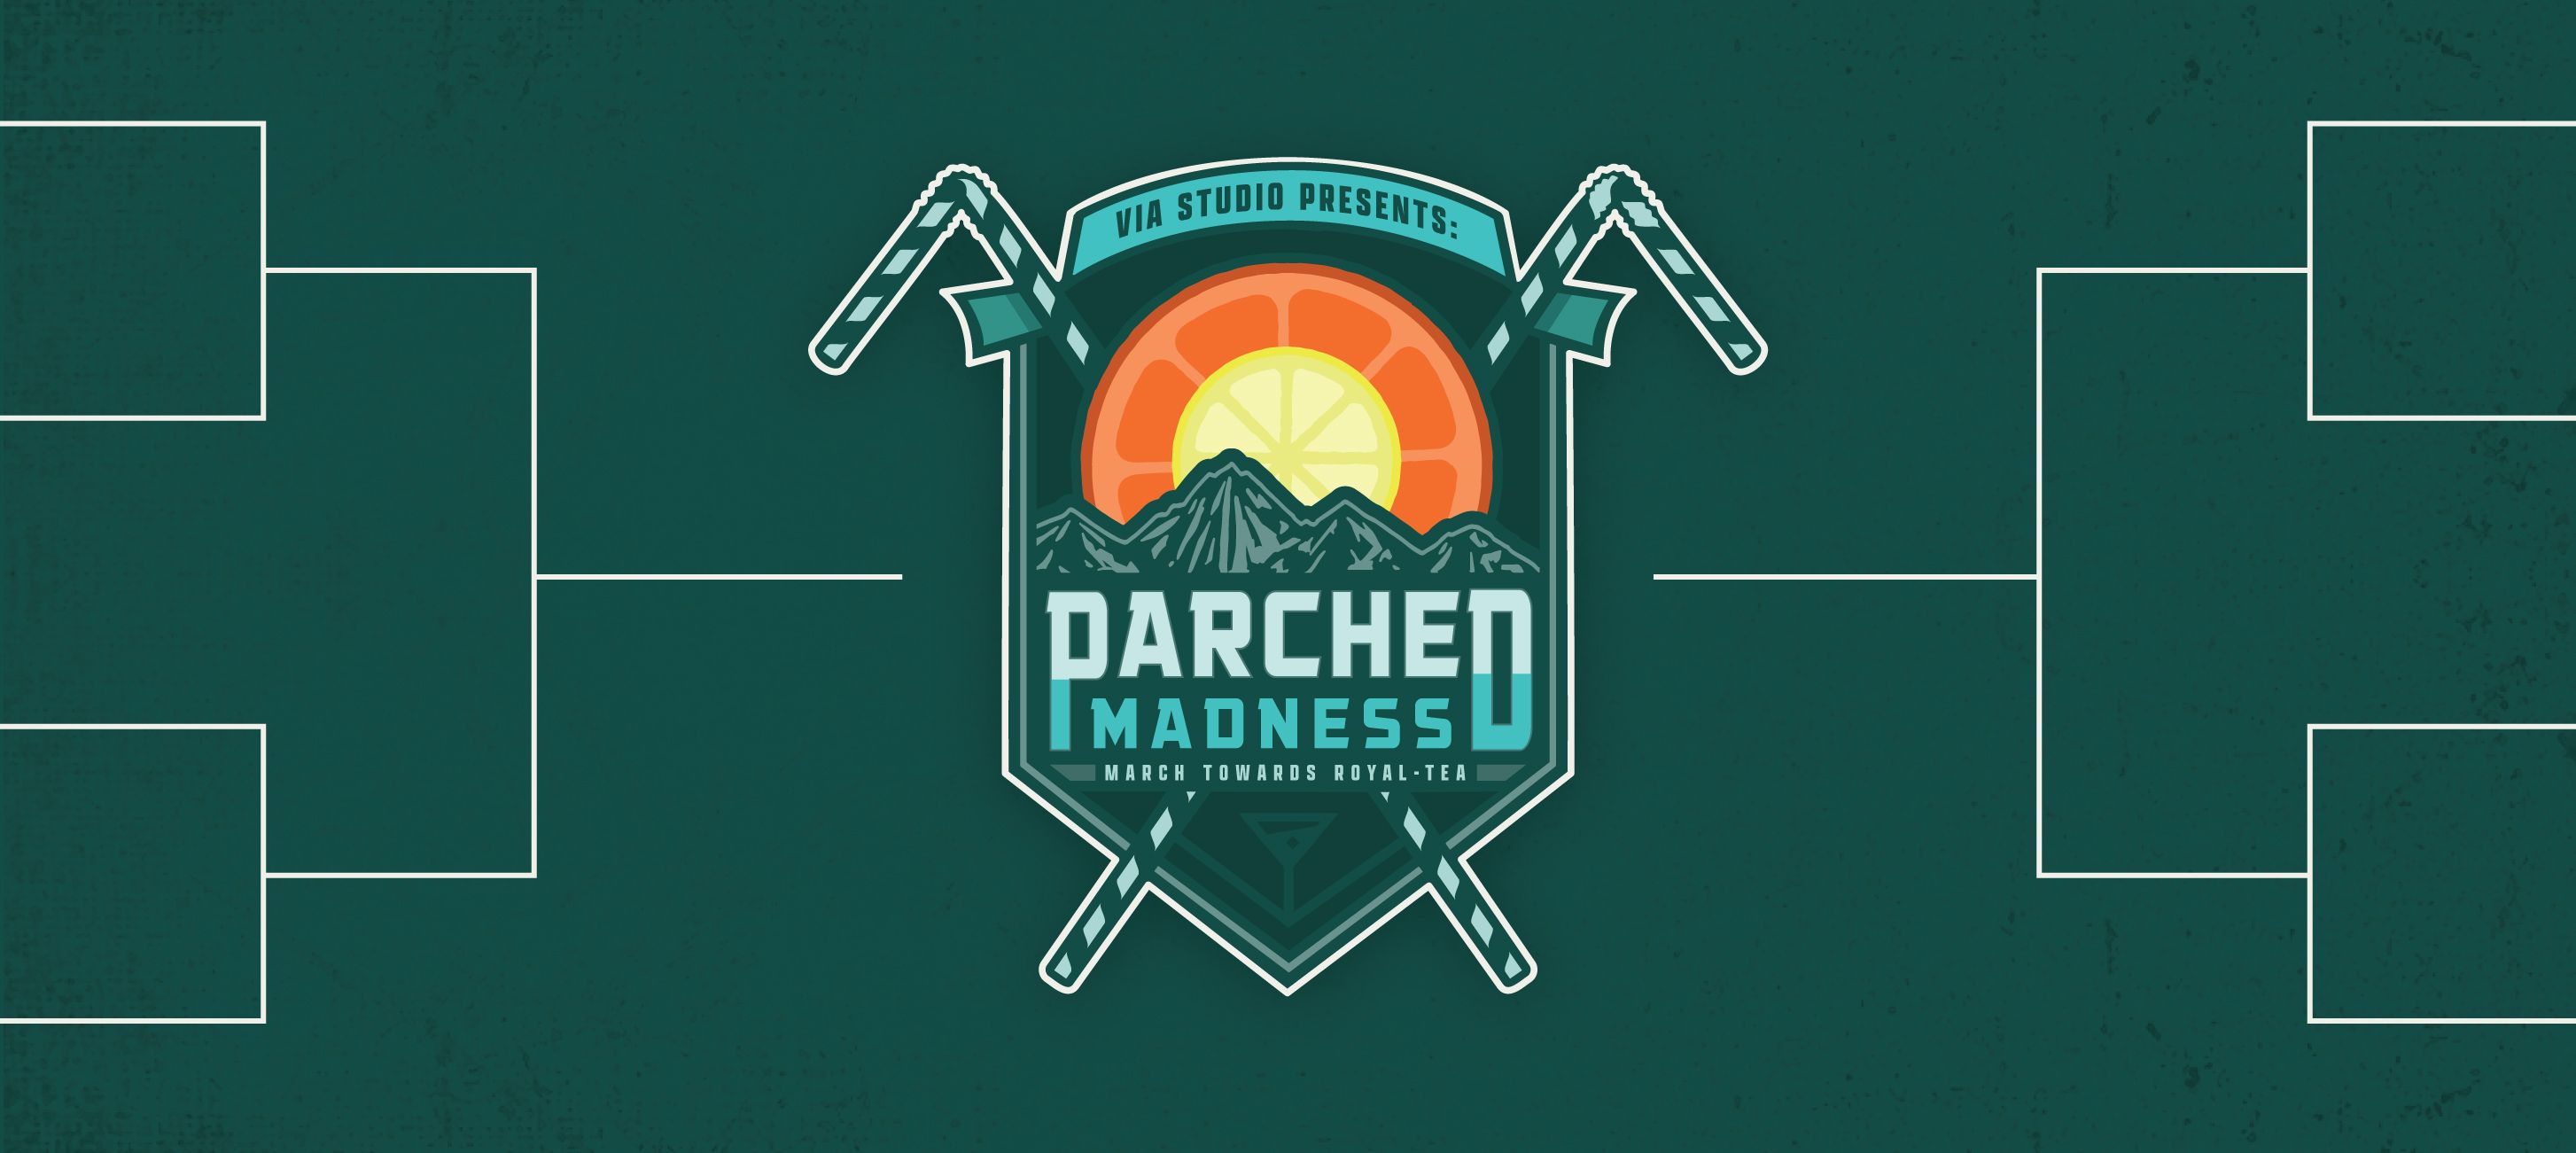 Parched Madness 2021 Recap